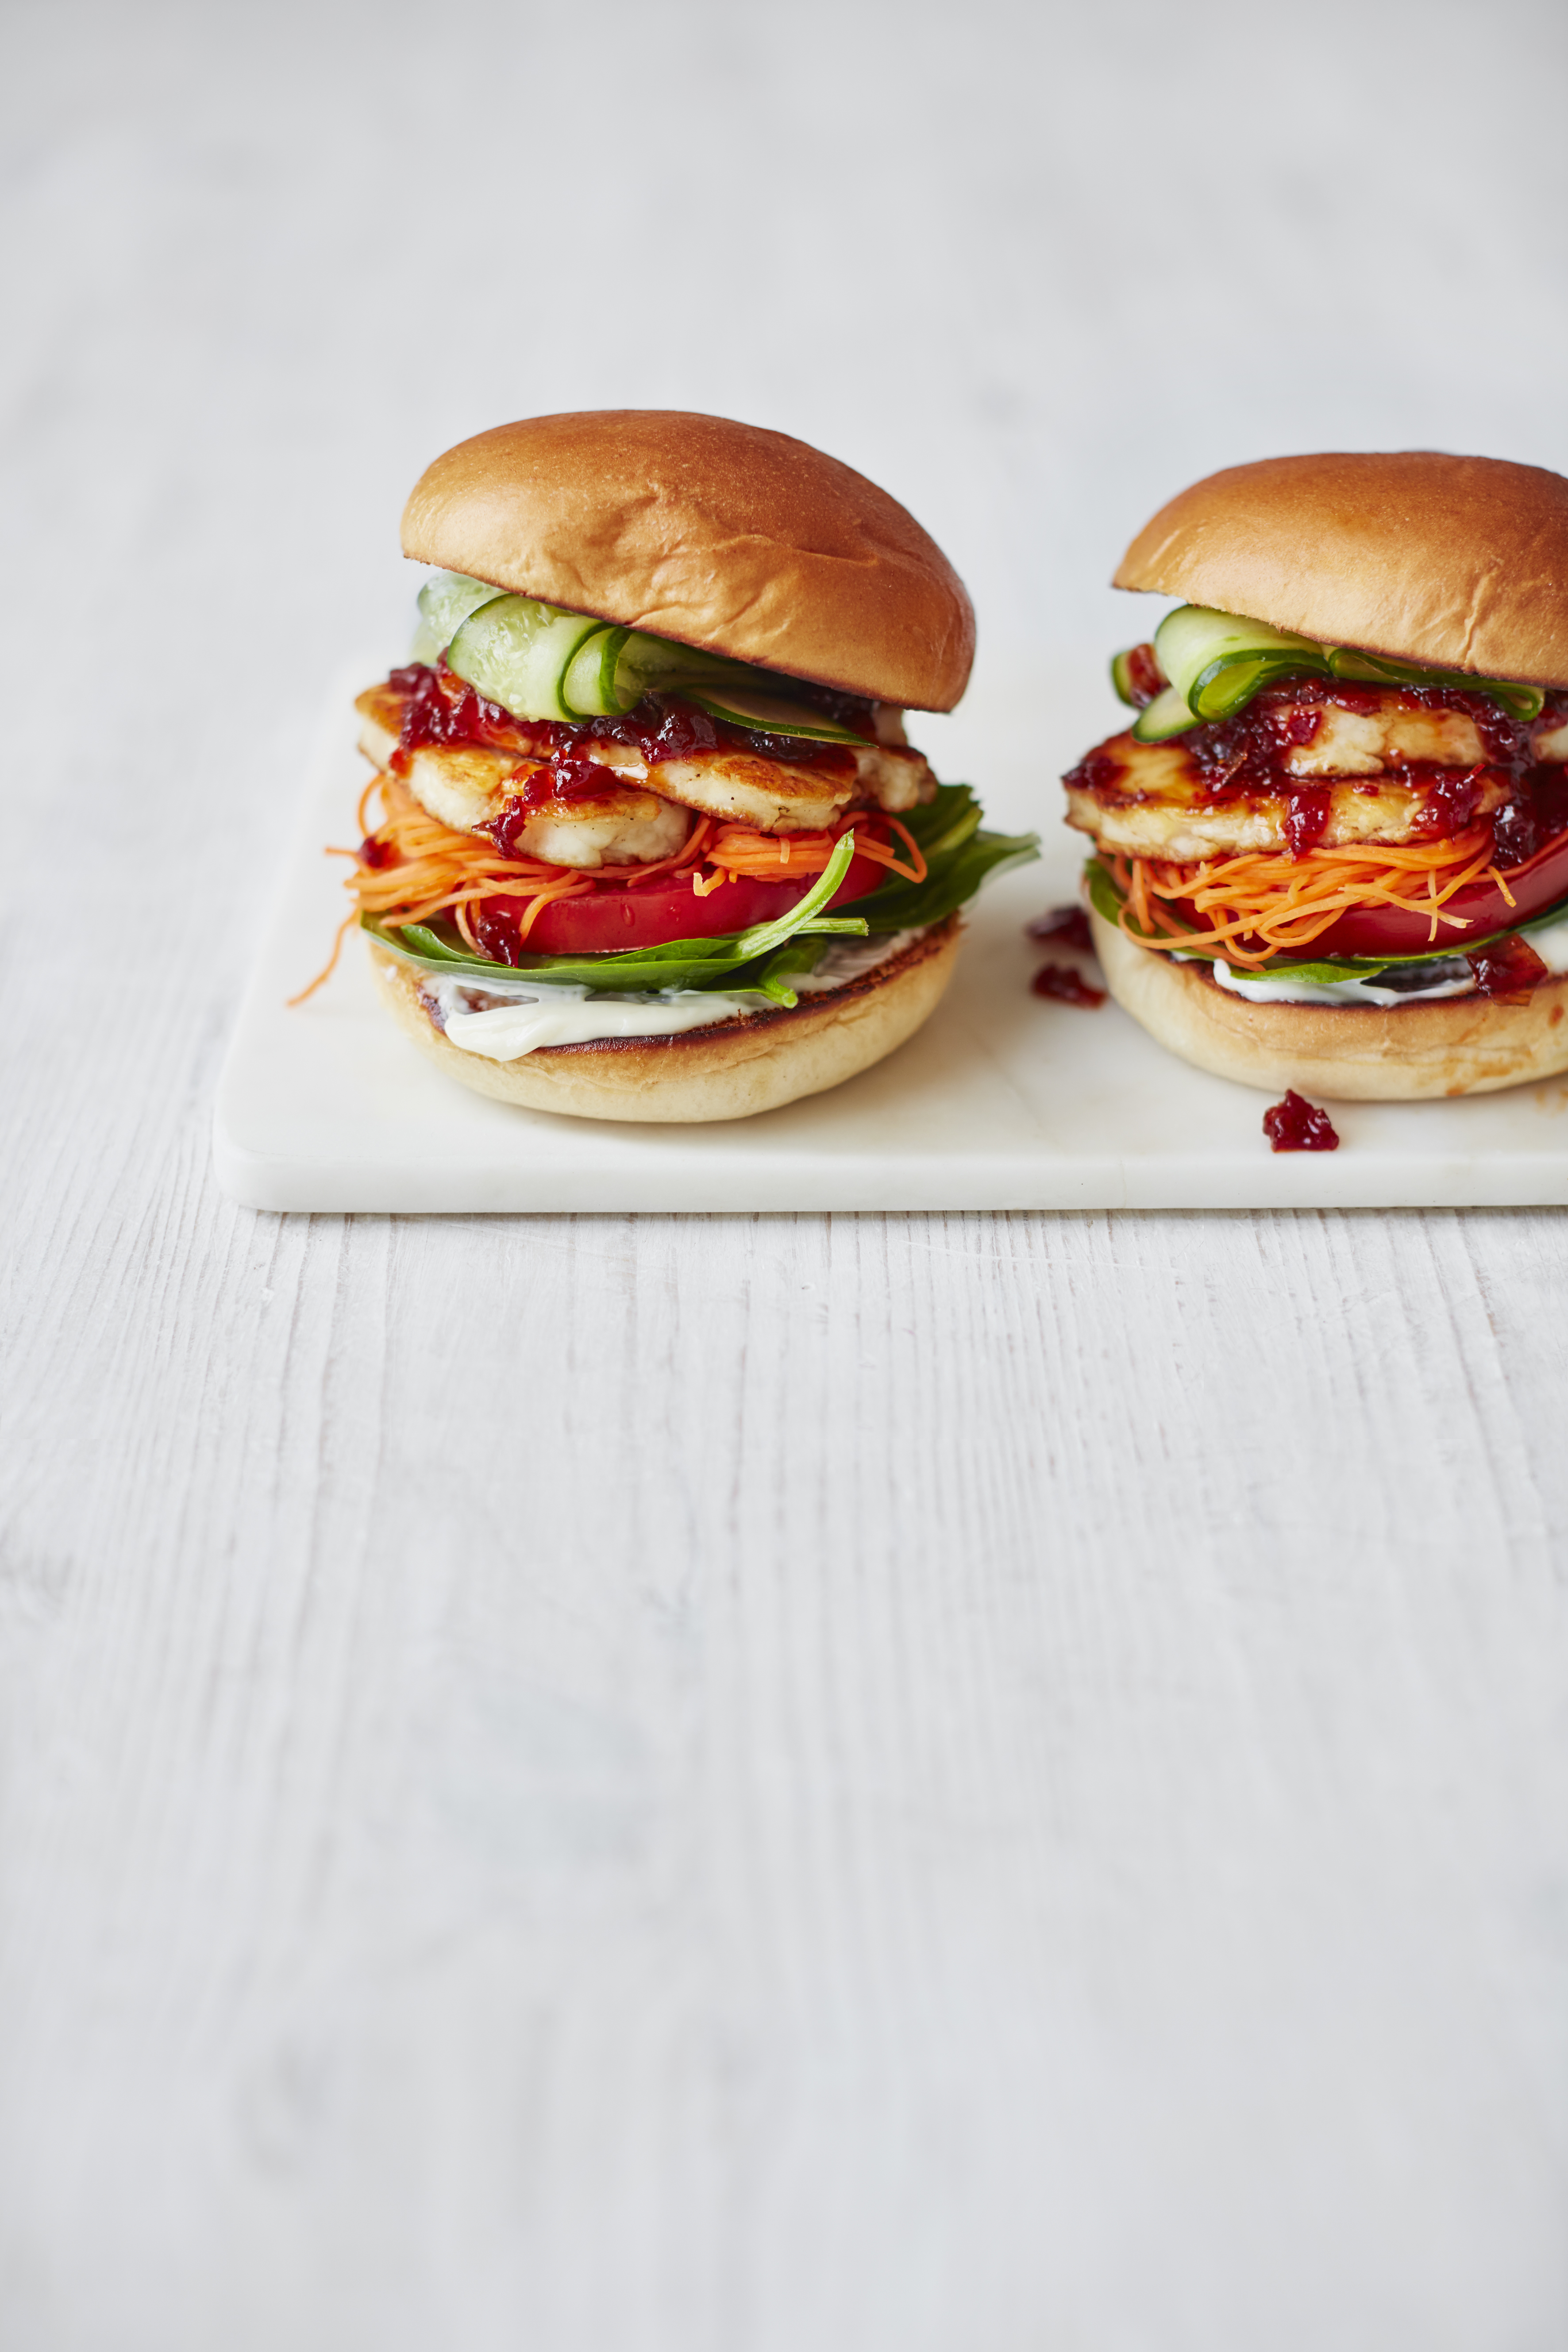 Halloumi burgers with chilli jam, spinach, carrot and cucumber